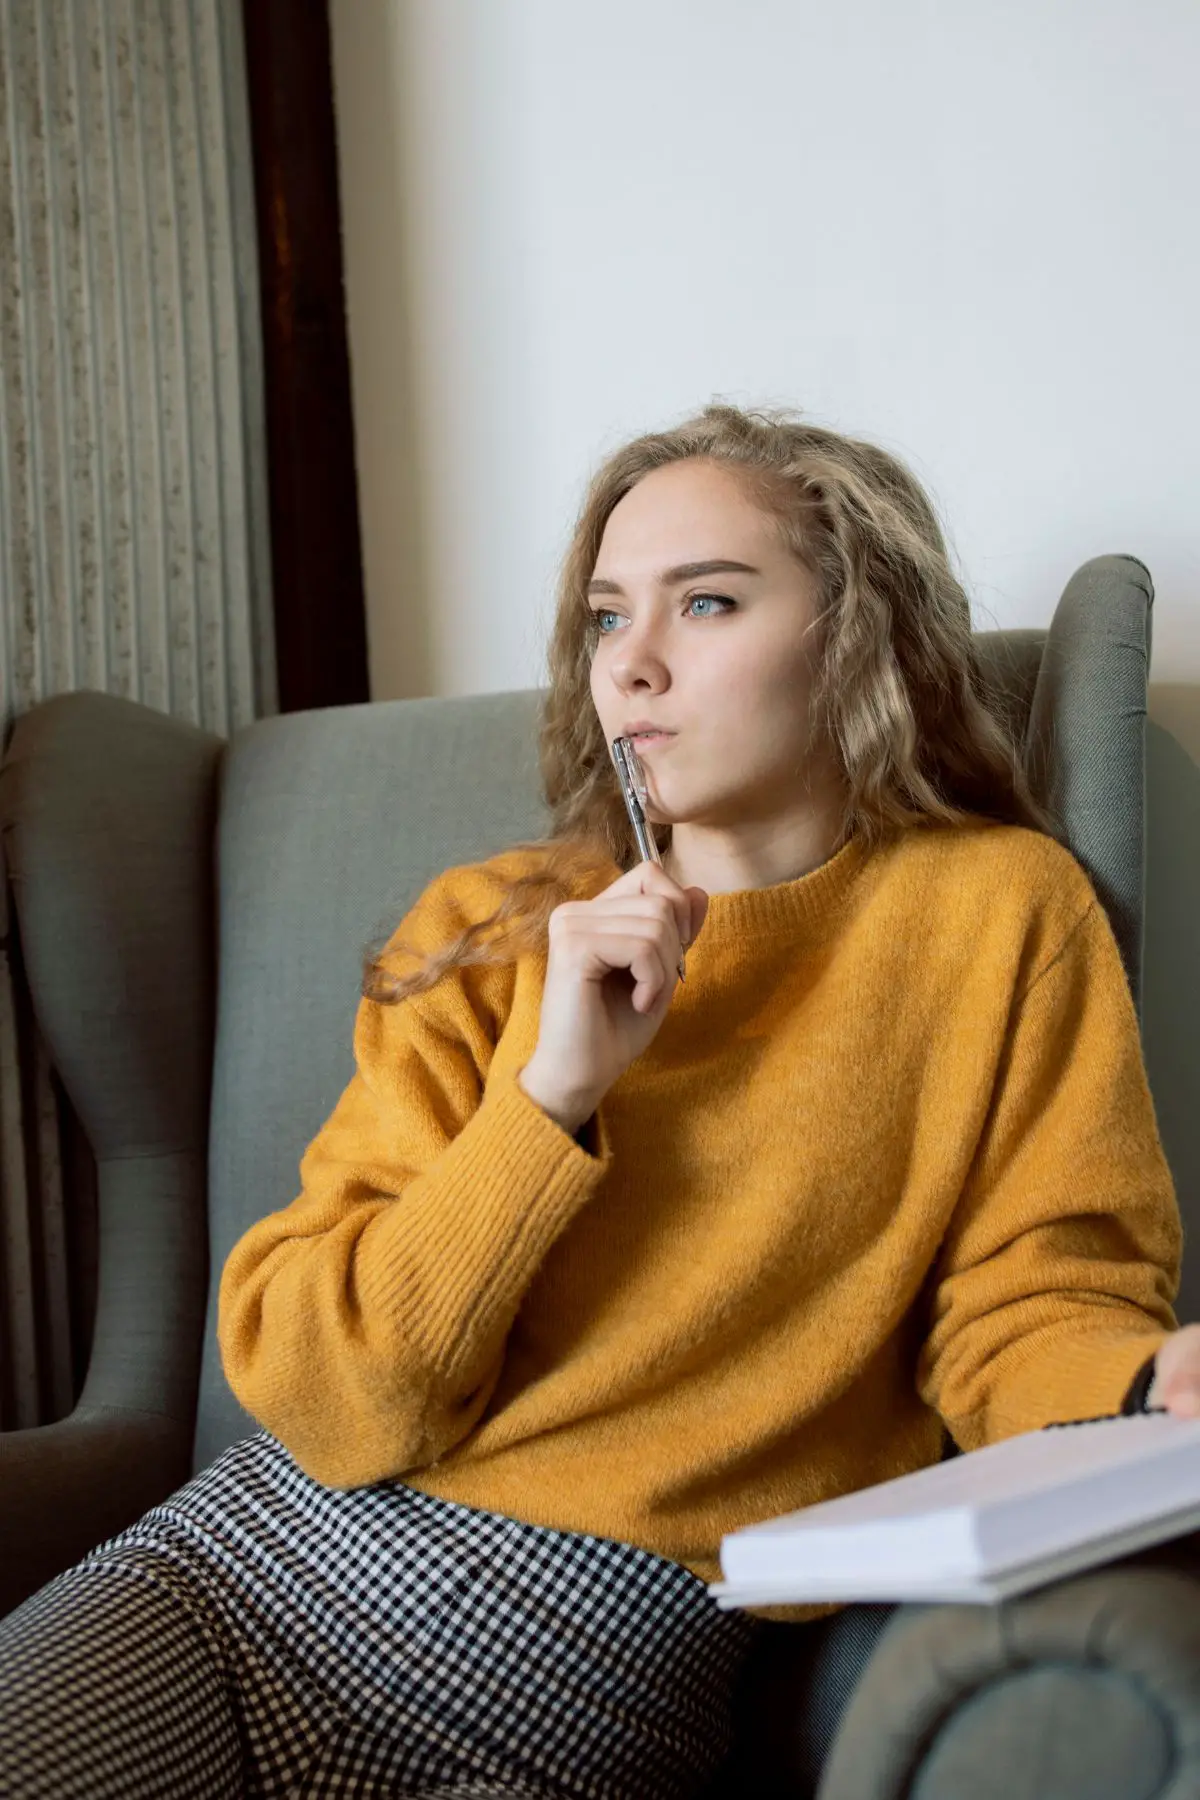 This is a photo of a teenage girl sitting in a chair.  She's holding a pen up to her mouth and she's thinking.  She's holding a notebook too.